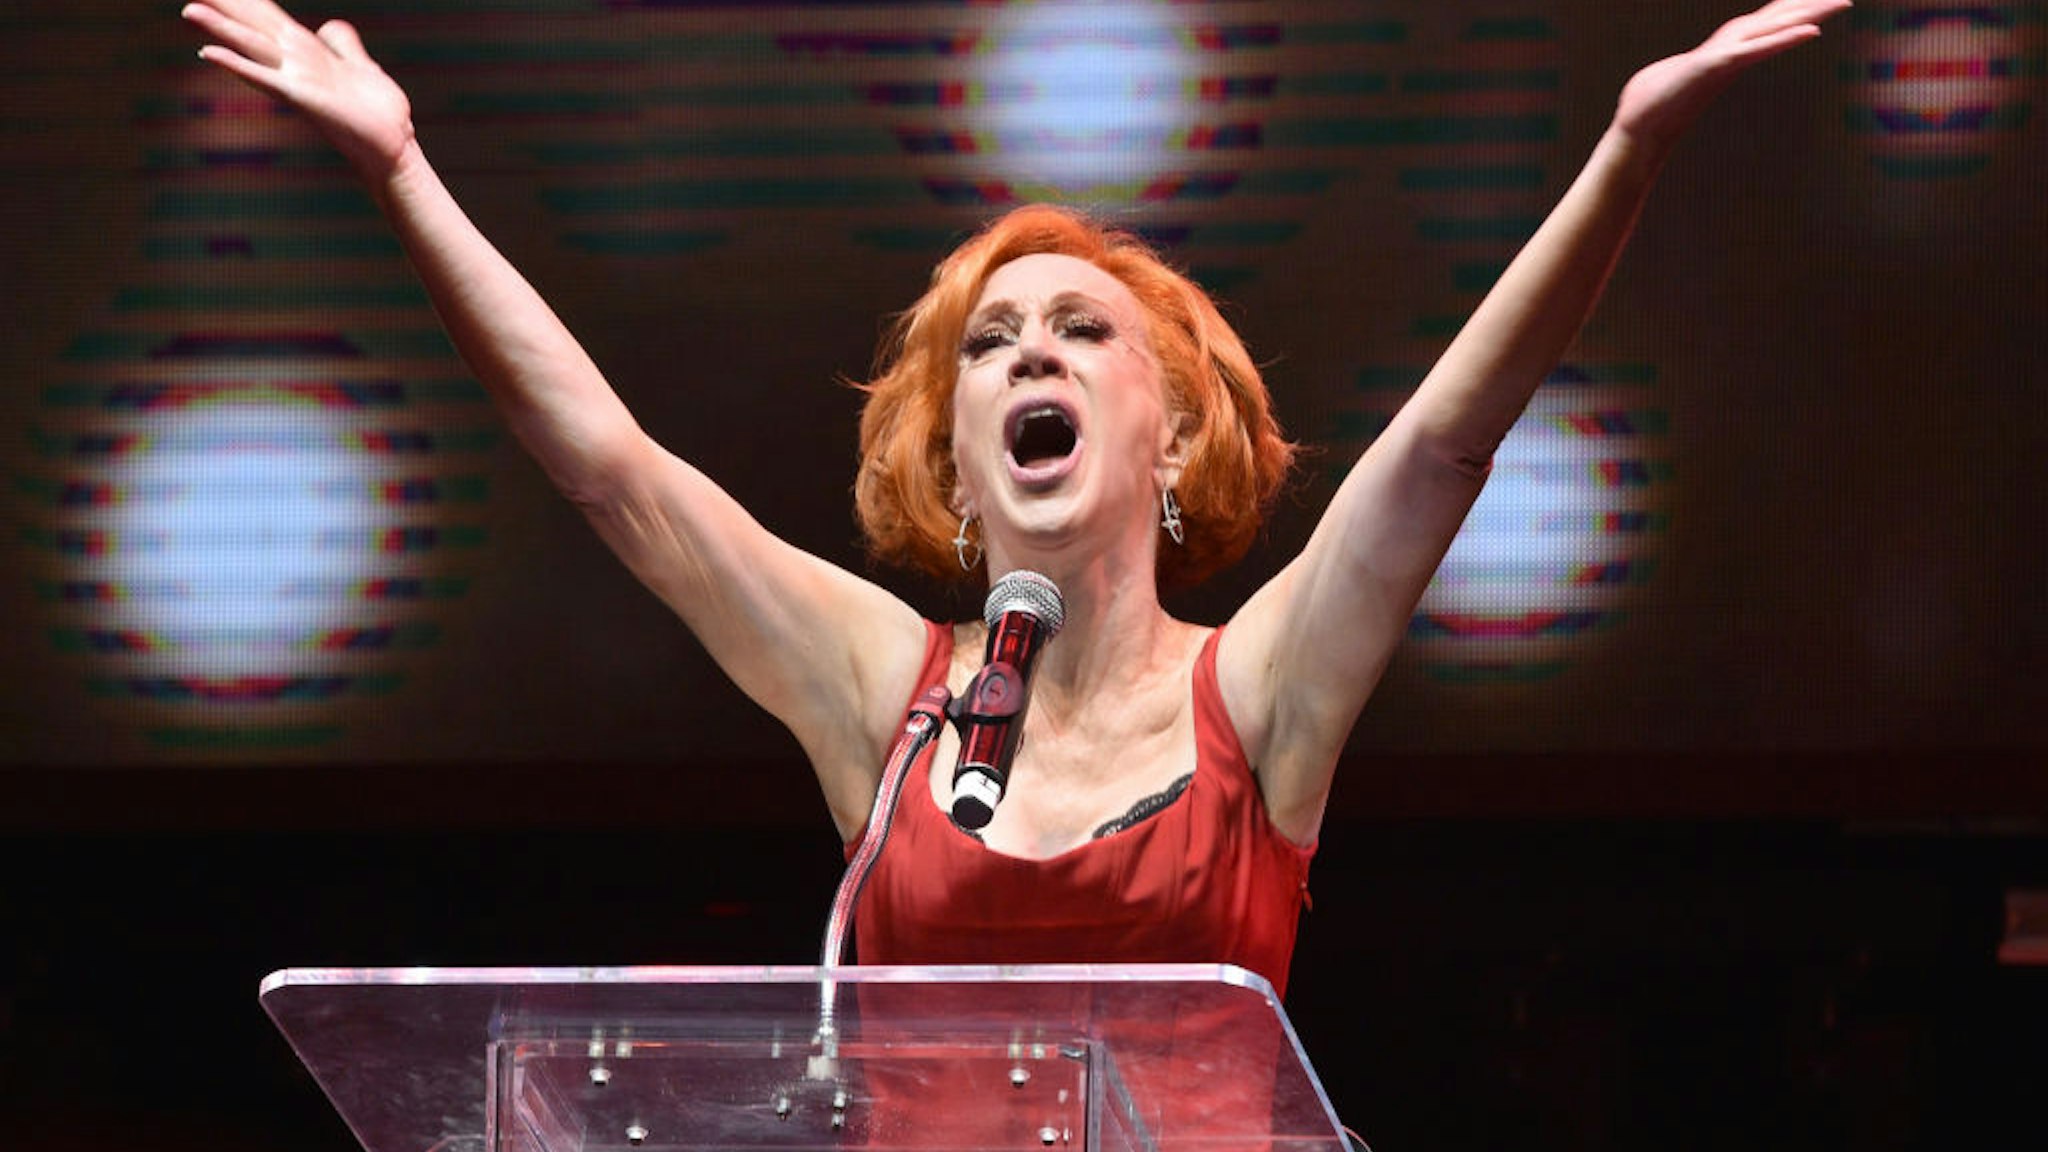 Kathy Griffin speaks onstage at Gay Porn's Biggest Night - Str8UpGayPorn Awards, Hosted By Kathy Griffin at Avalon Theater on January 12, 2020 in Los Angeles, California.